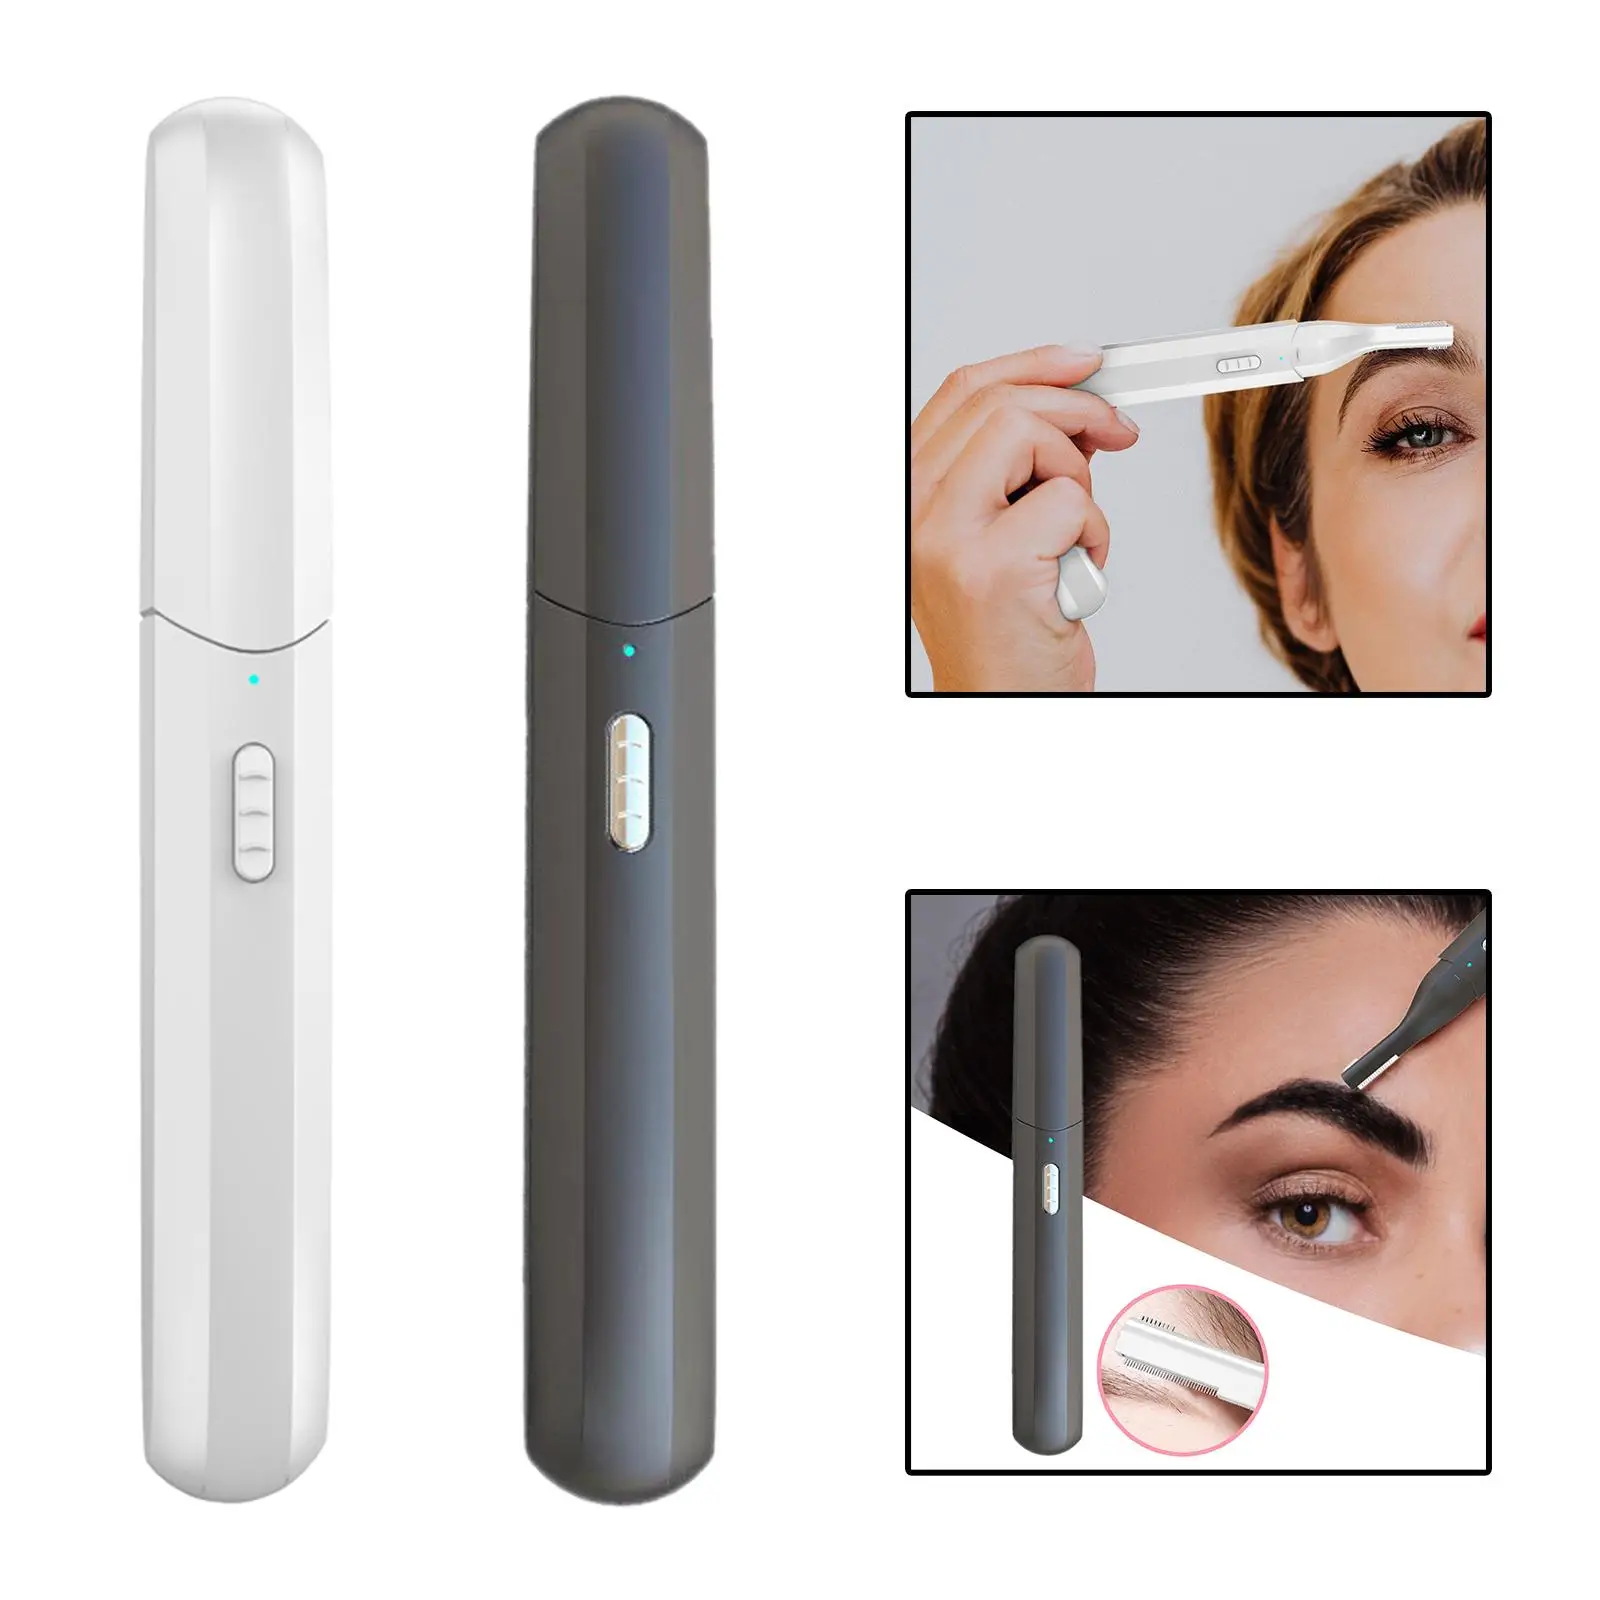 USB Charging Electric Eyebrow trimming Hair Removal Tool Precision Cutting with Dual Cutter Head Portable for Legs